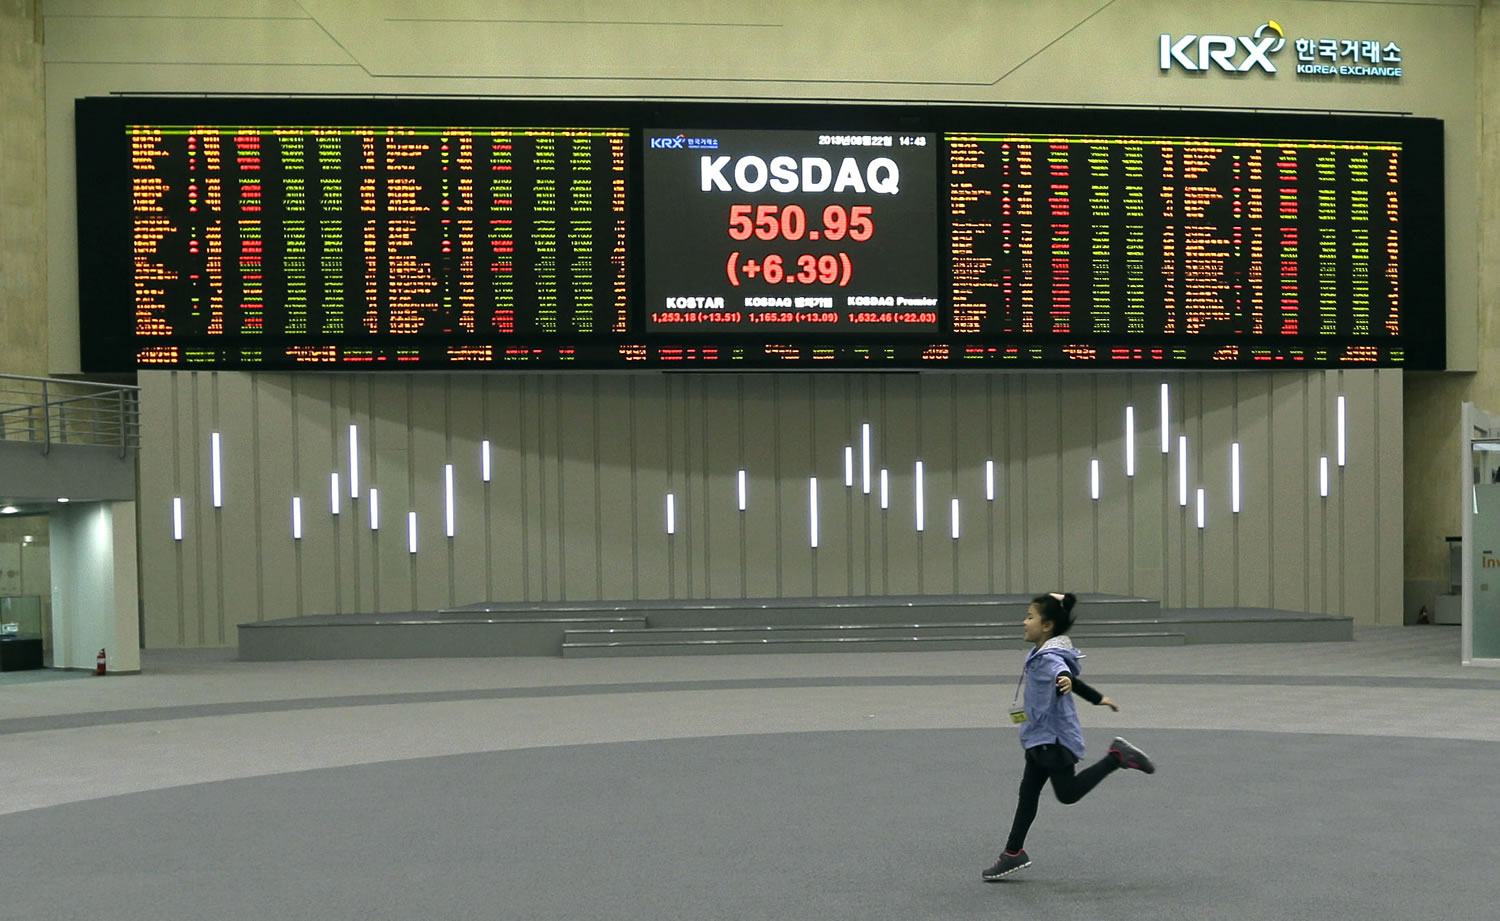 A girl plays near a screen showing the stock prices at the Korea Exchange in Seoul, South Korea.